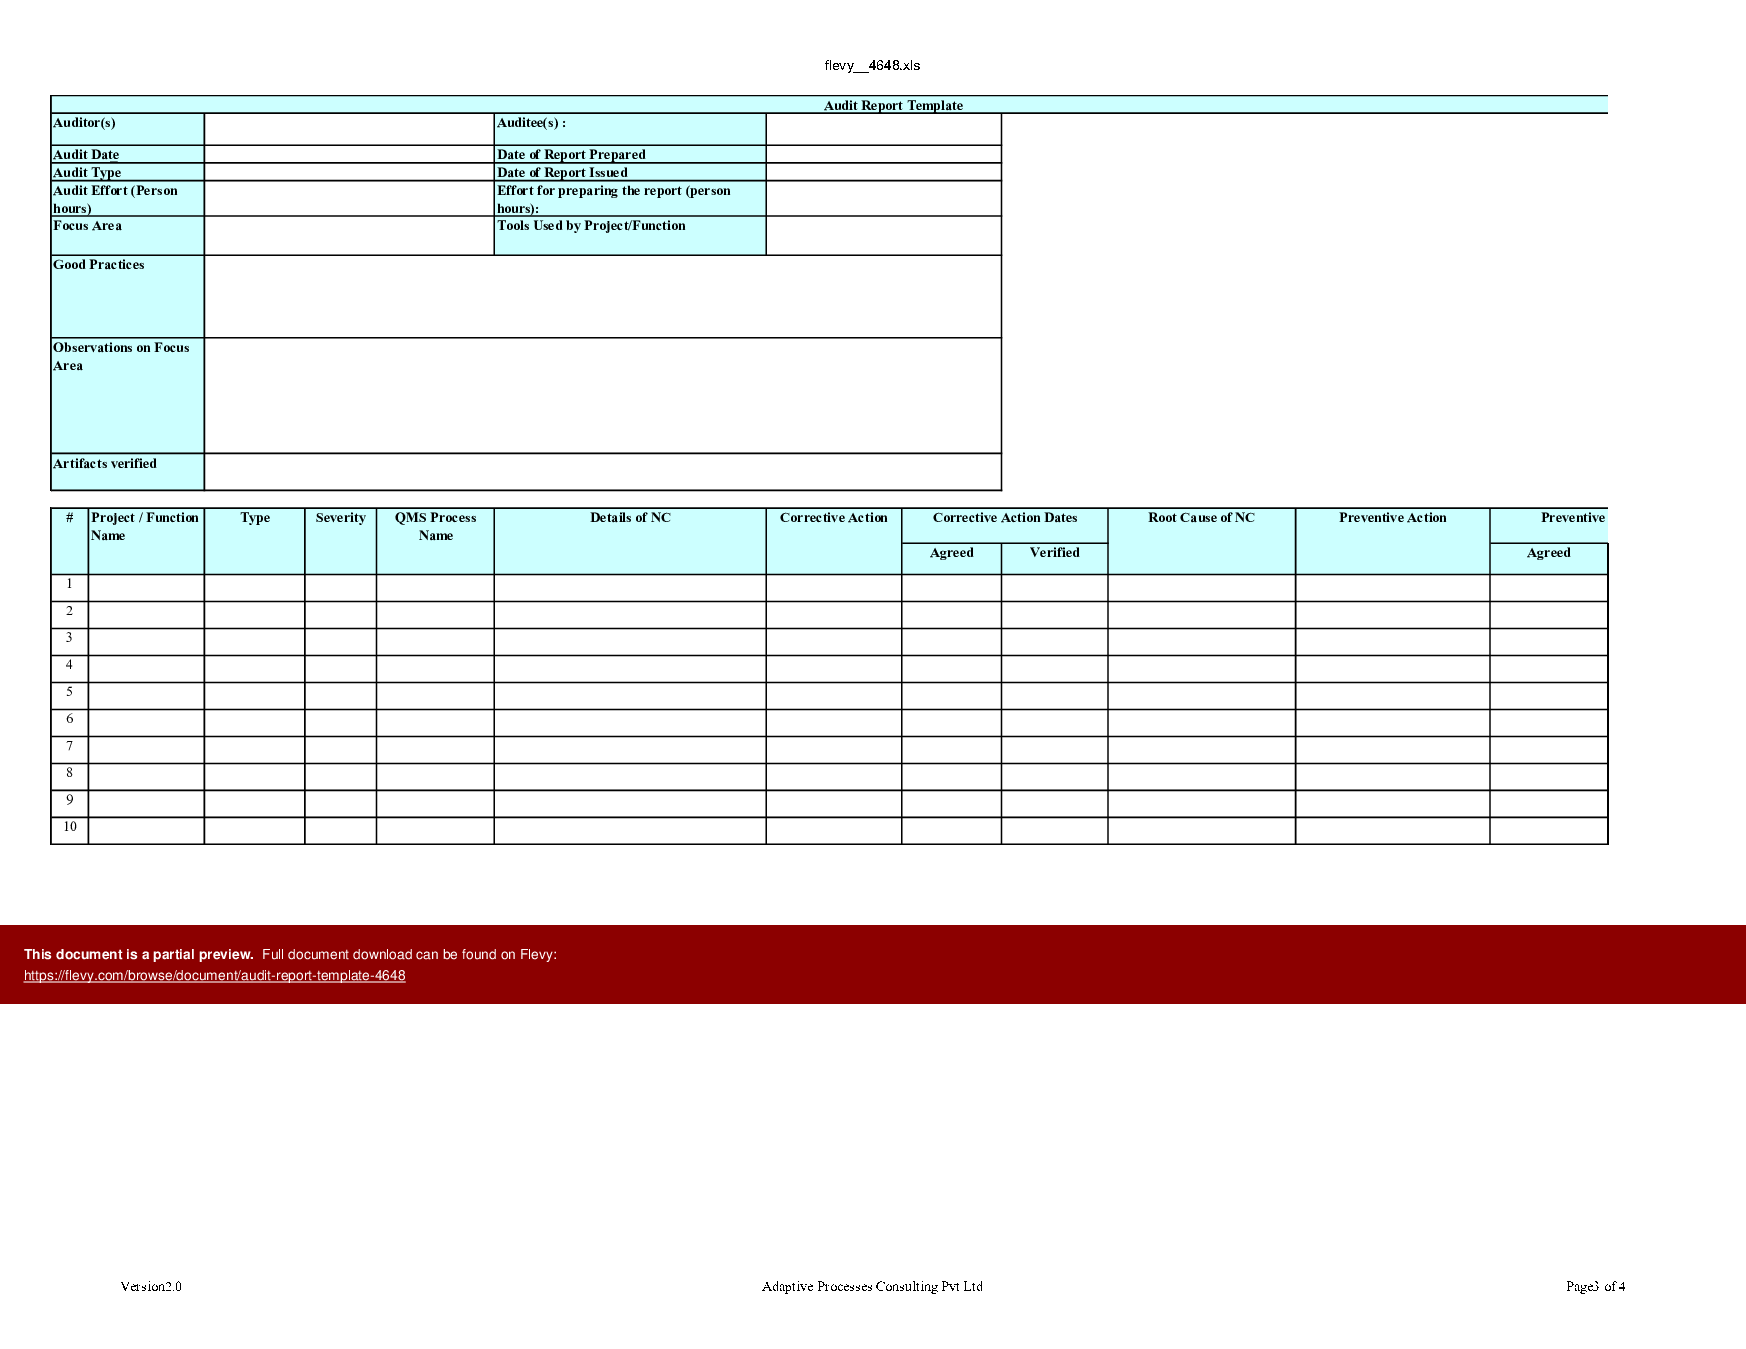 Audit Report Template (Excel template (XLS)) Preview Image